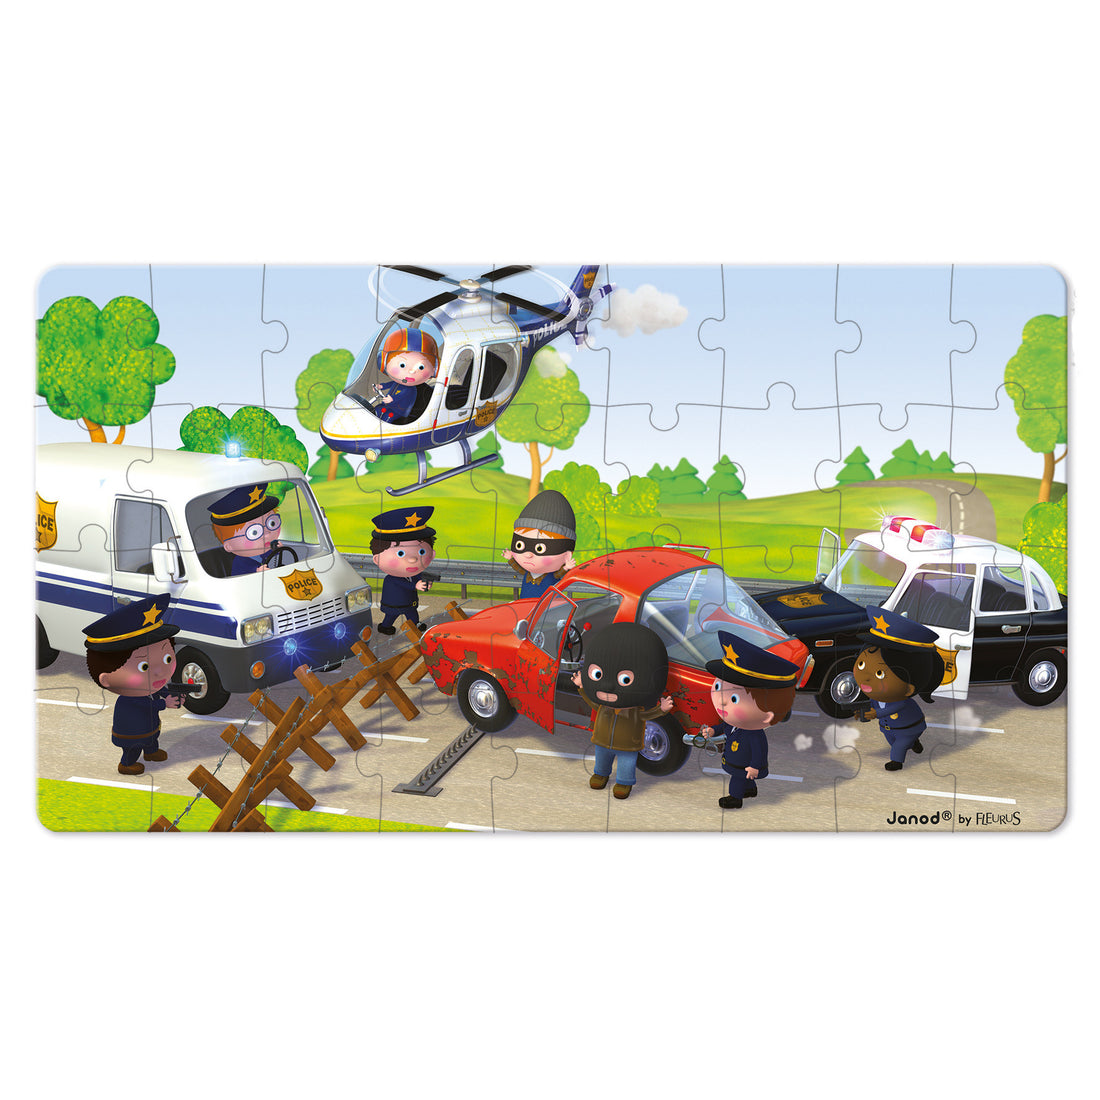 janod-lovely-puzzles-brice's-police-car-04